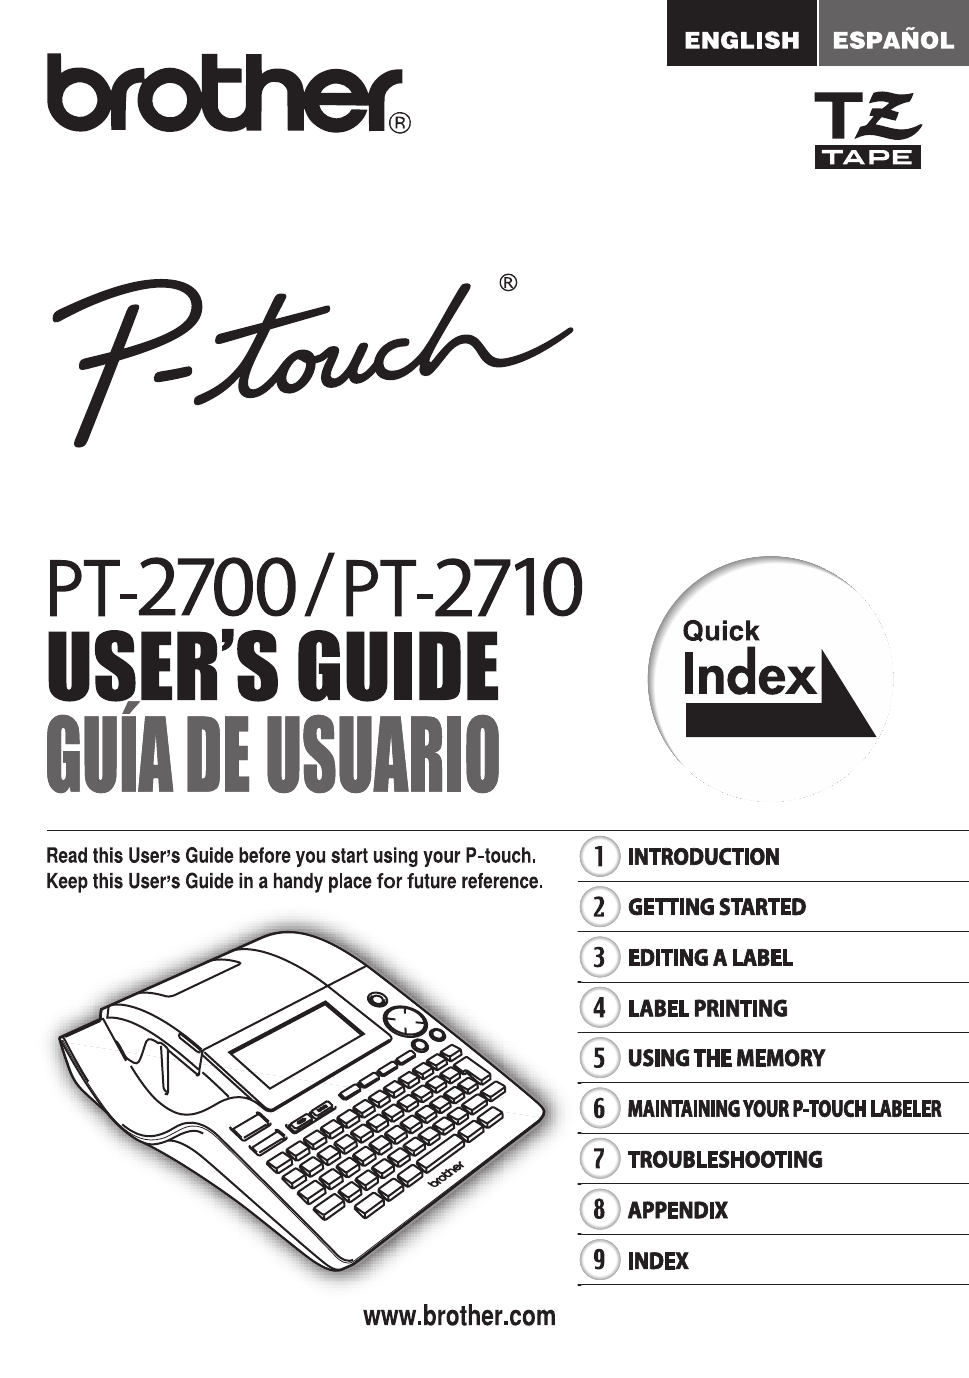 Brother p-touch software